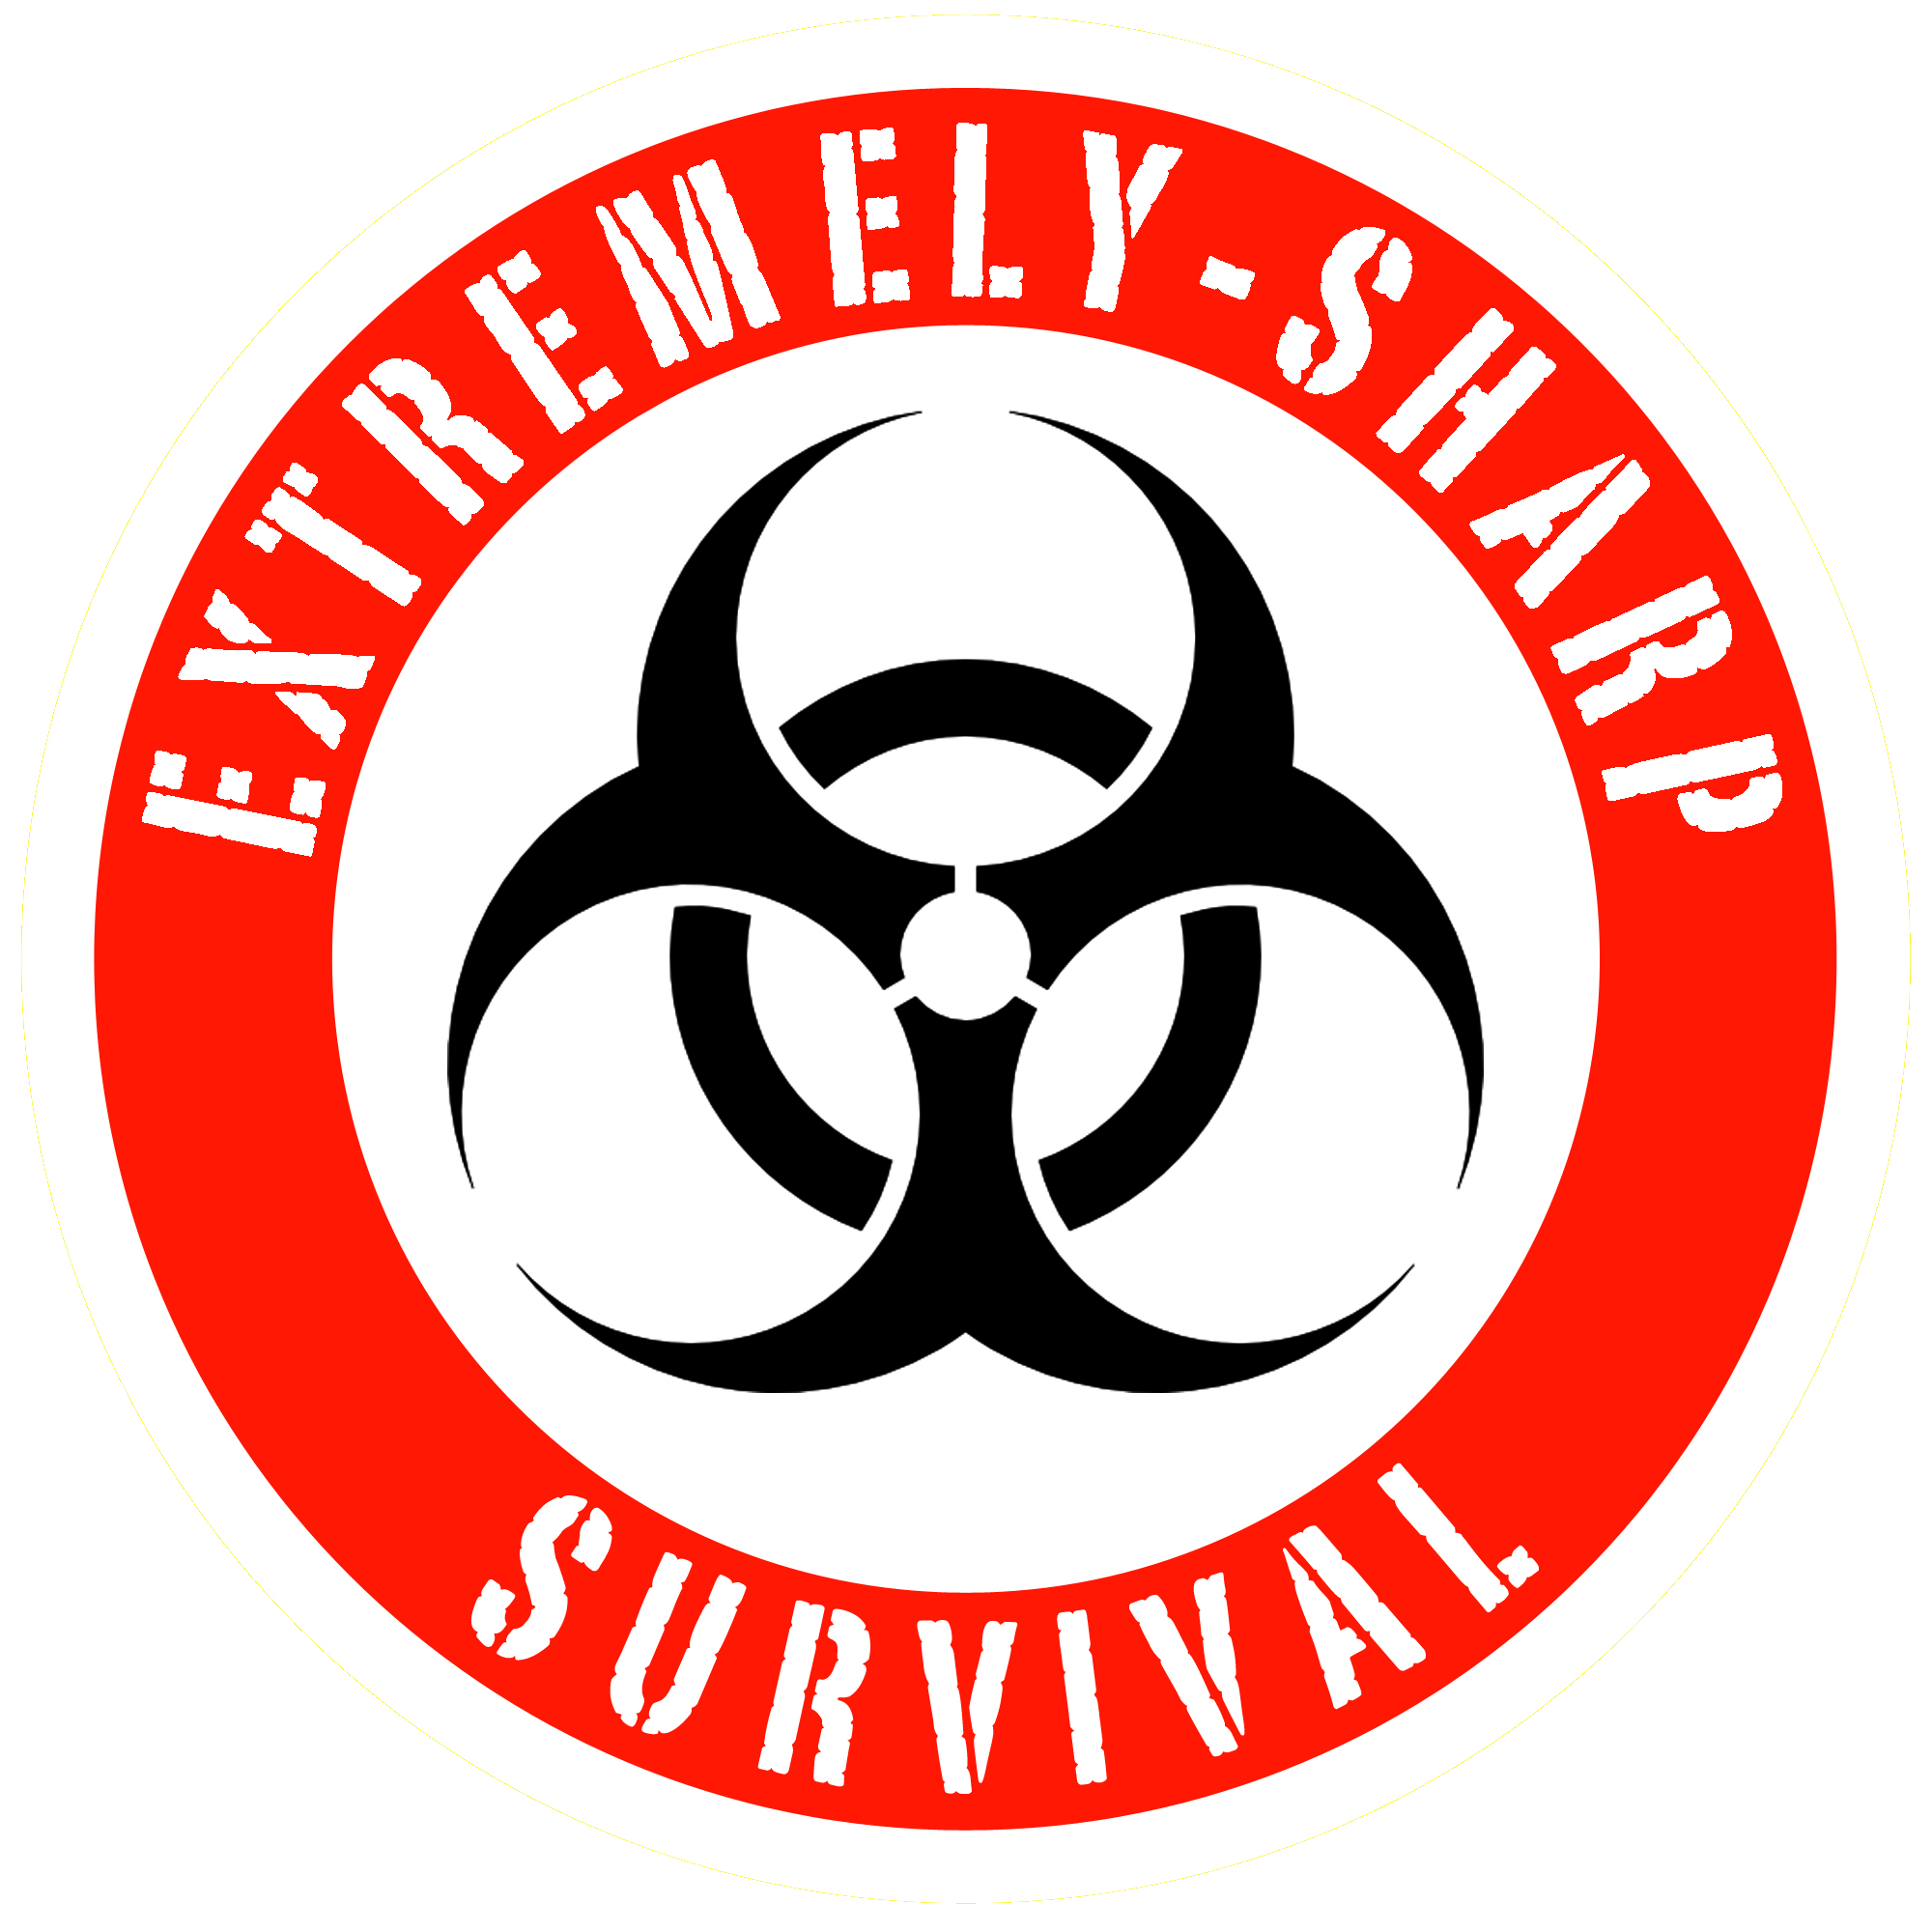 Get this Extremely-Sharp Survival sticker for only $1 at Esknives.com | Nuclear symbol 3" circle